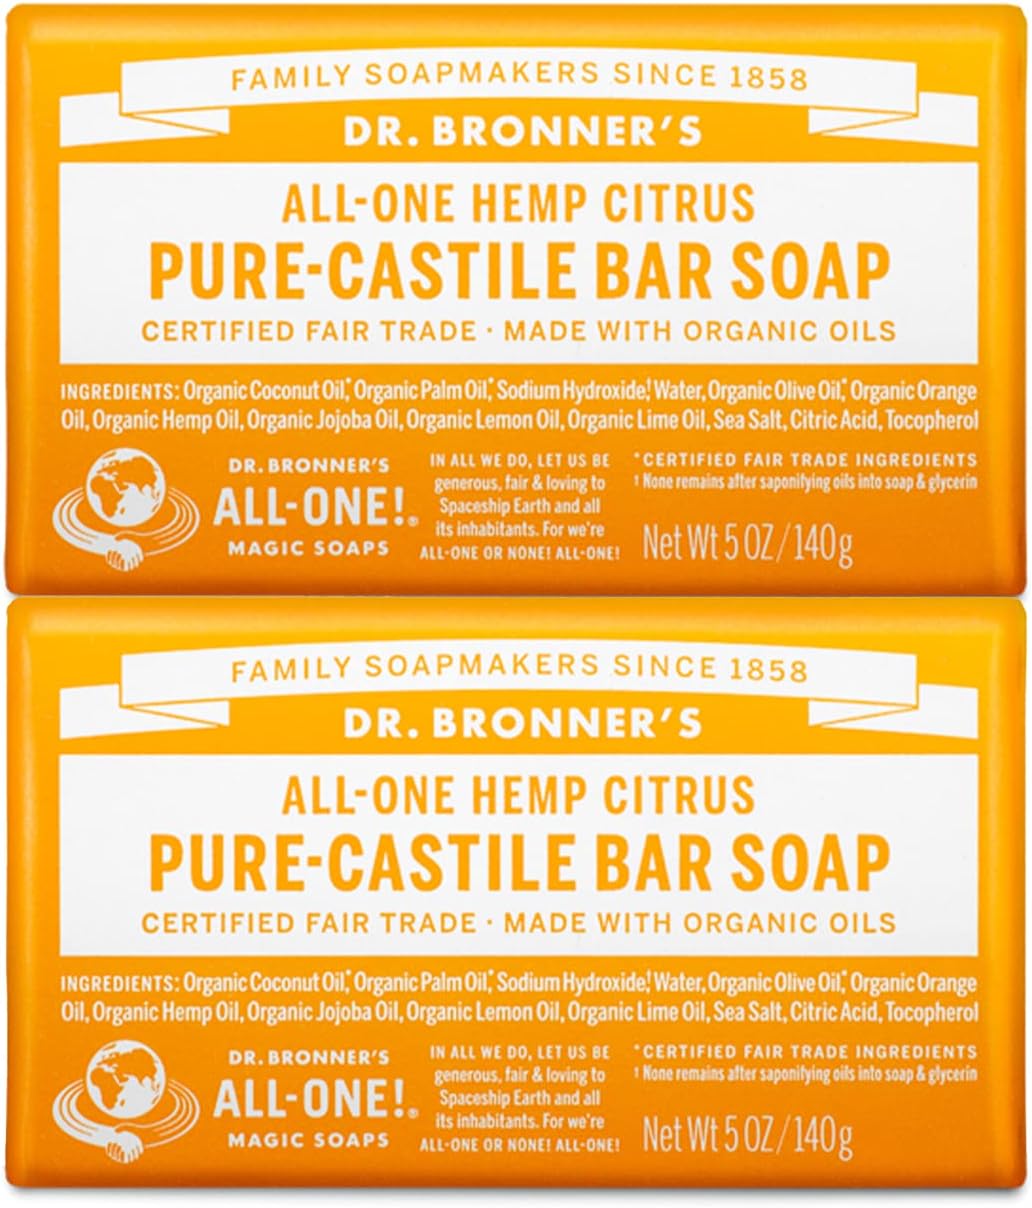 Dr. Bronner's - Pure-Castile Bar Soap (Citrus, 5 ounce, 2-Pack) - Made with Organic Oils, For Face, Body and Hair, Gentle and Moisturizing, Biodegradable, Vegan, Cruelty-free, Non-GMO